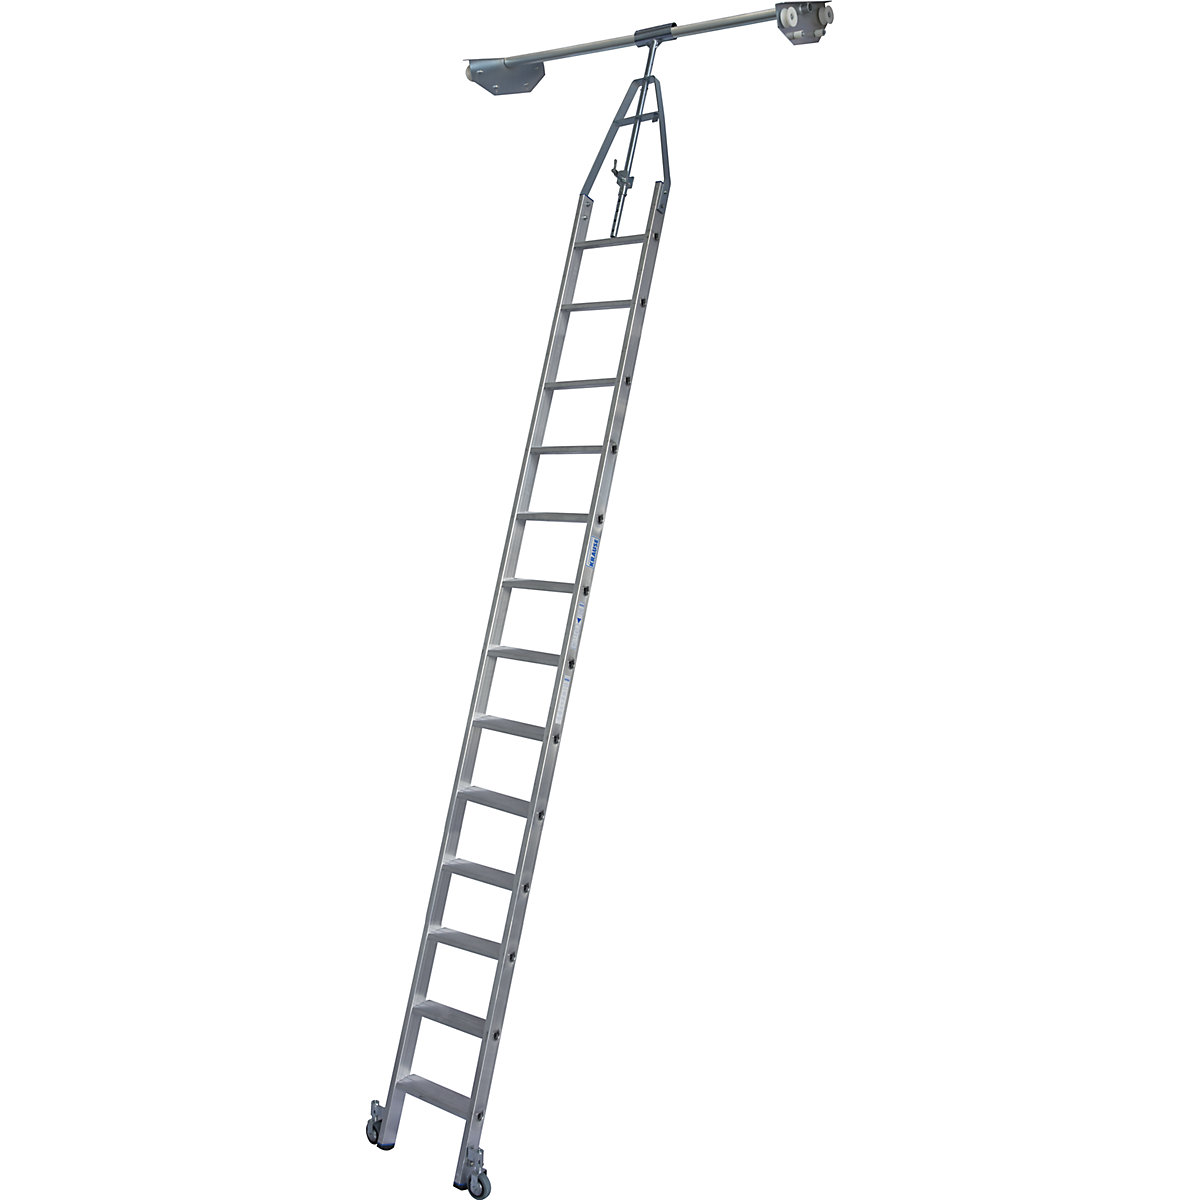 Step shelf ladder – KRAUSE, double sided shelf unit with wheel unit on top for round tubing rail system, 13 steps-9